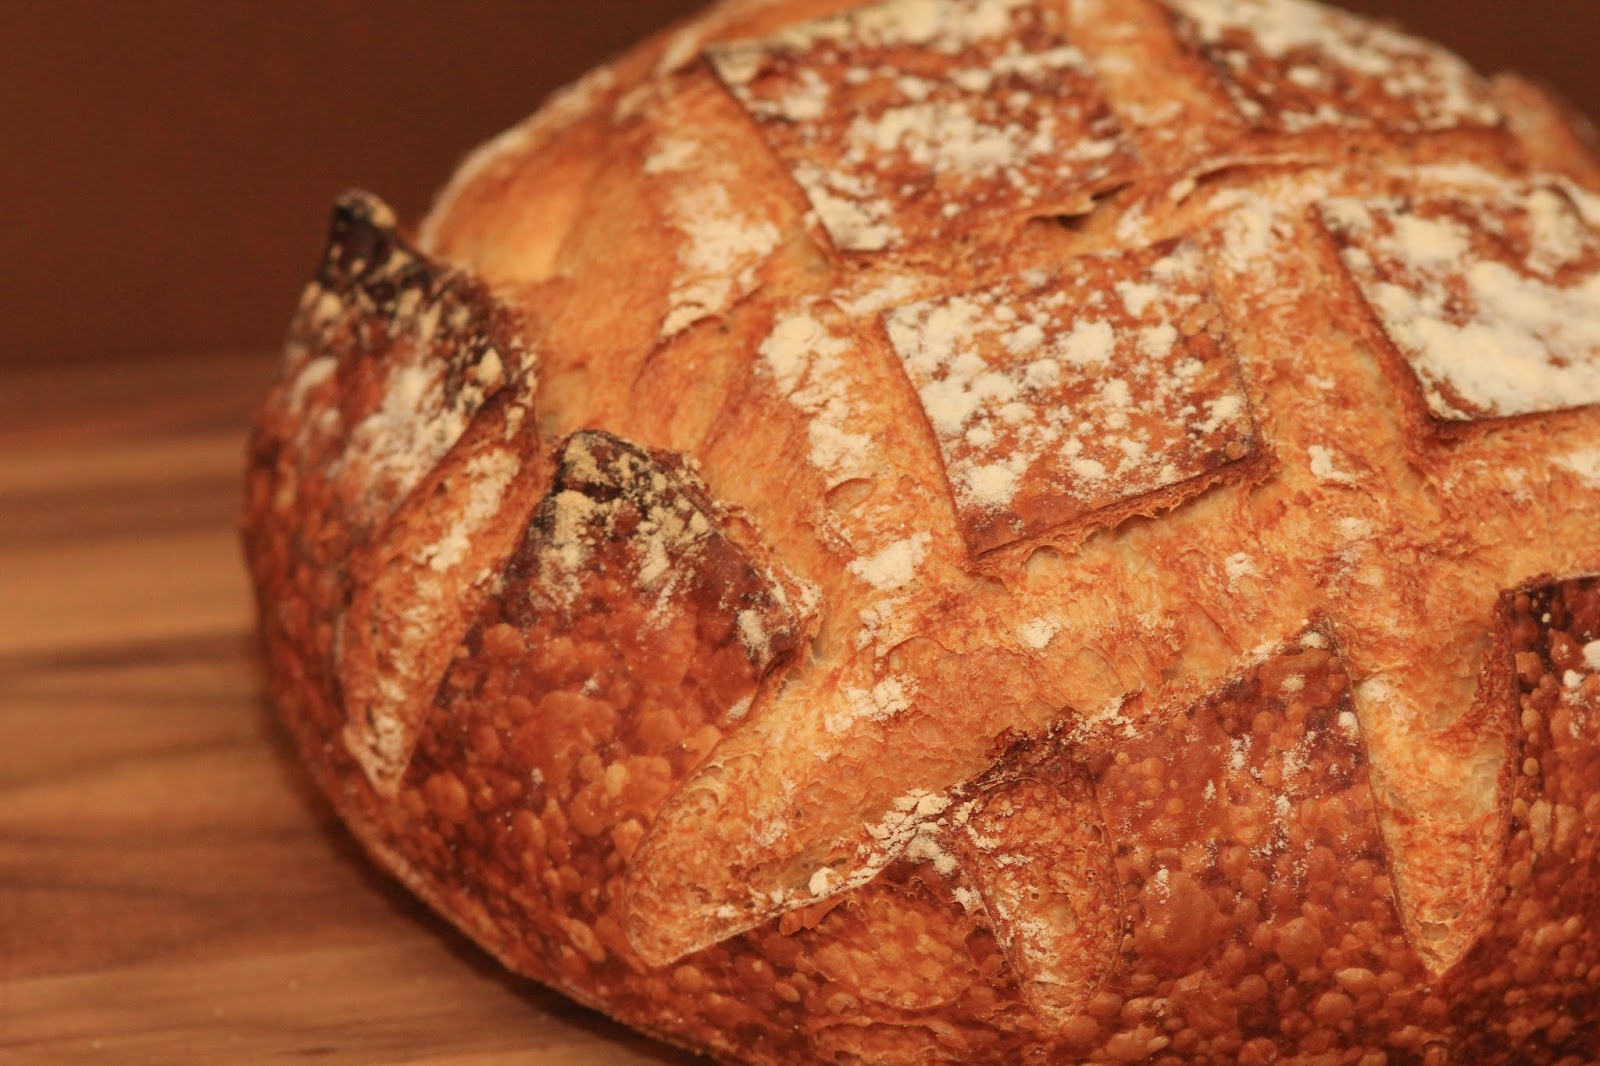 Travelers Guide to Iconic Food: #5: San Francisco Sourdough Bread